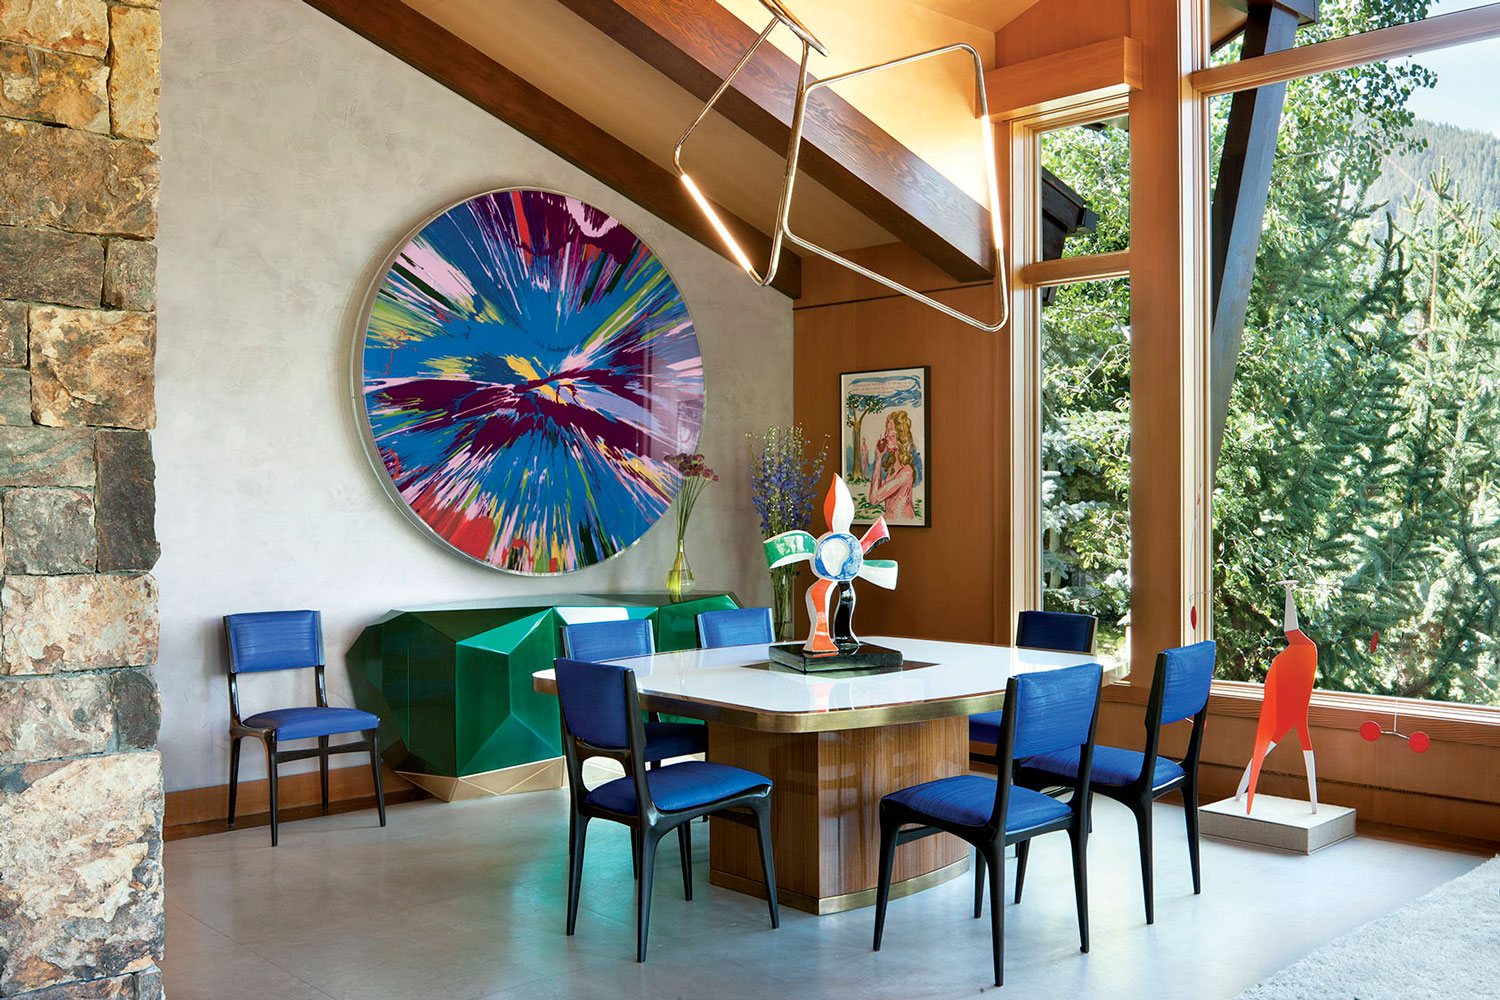 A Damien Hirst spin painting in the dining area of Sue Hostetler’s Aspen home designed by Sara Story.